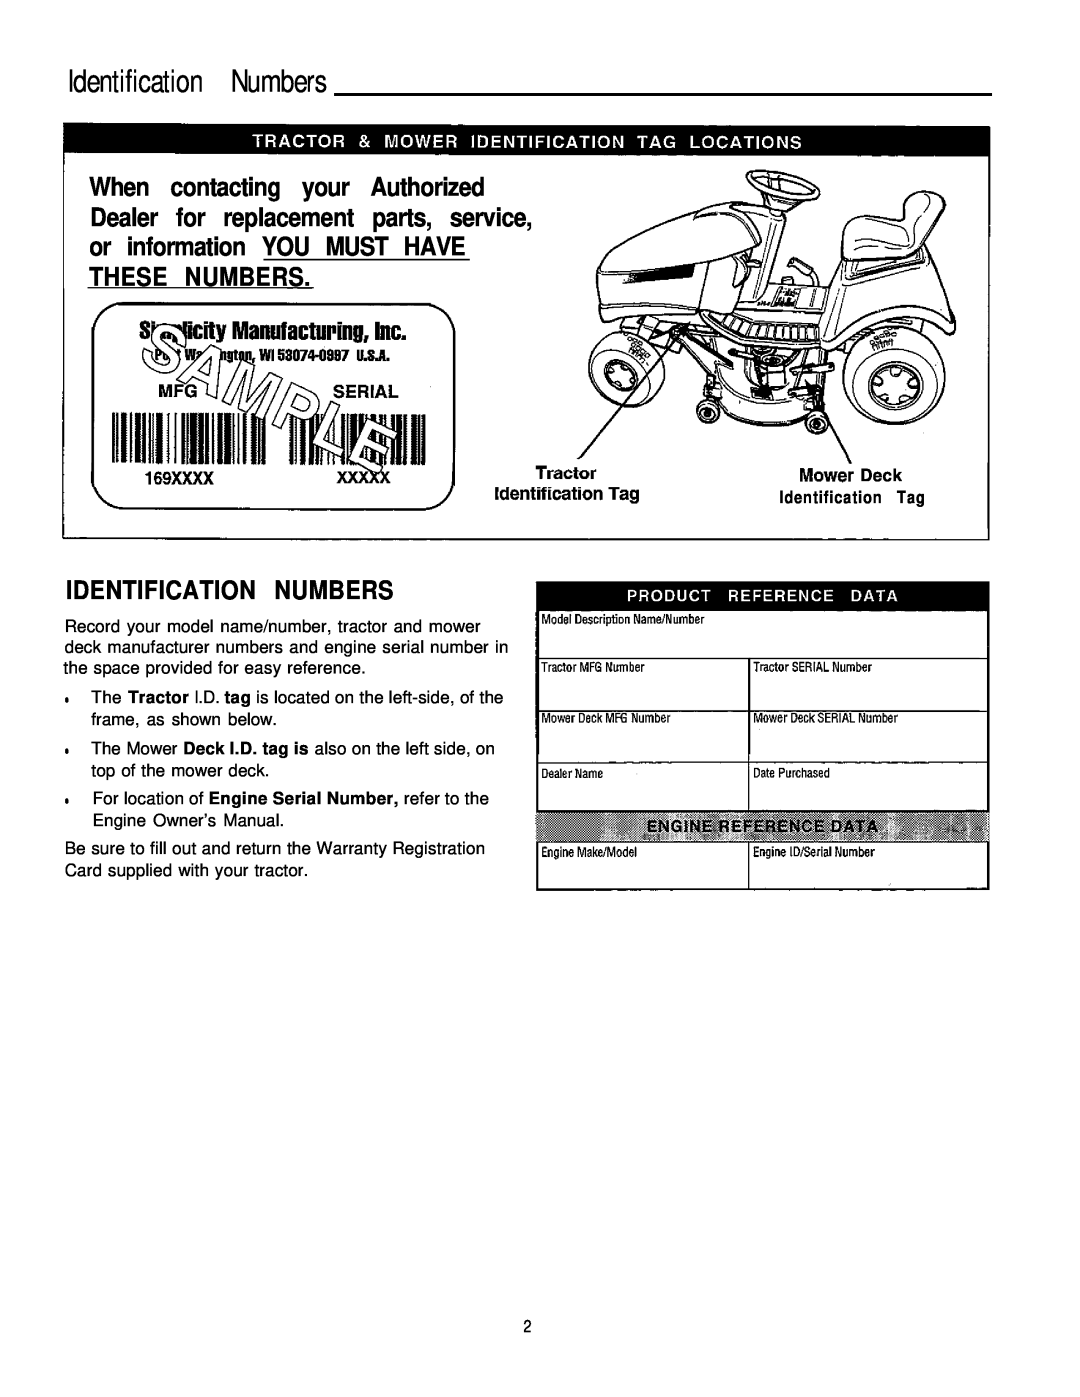 Simplicity 1693266, 1693264 manual Identification Numbers, 169XXXX, Mowe Deck Identification Tag 